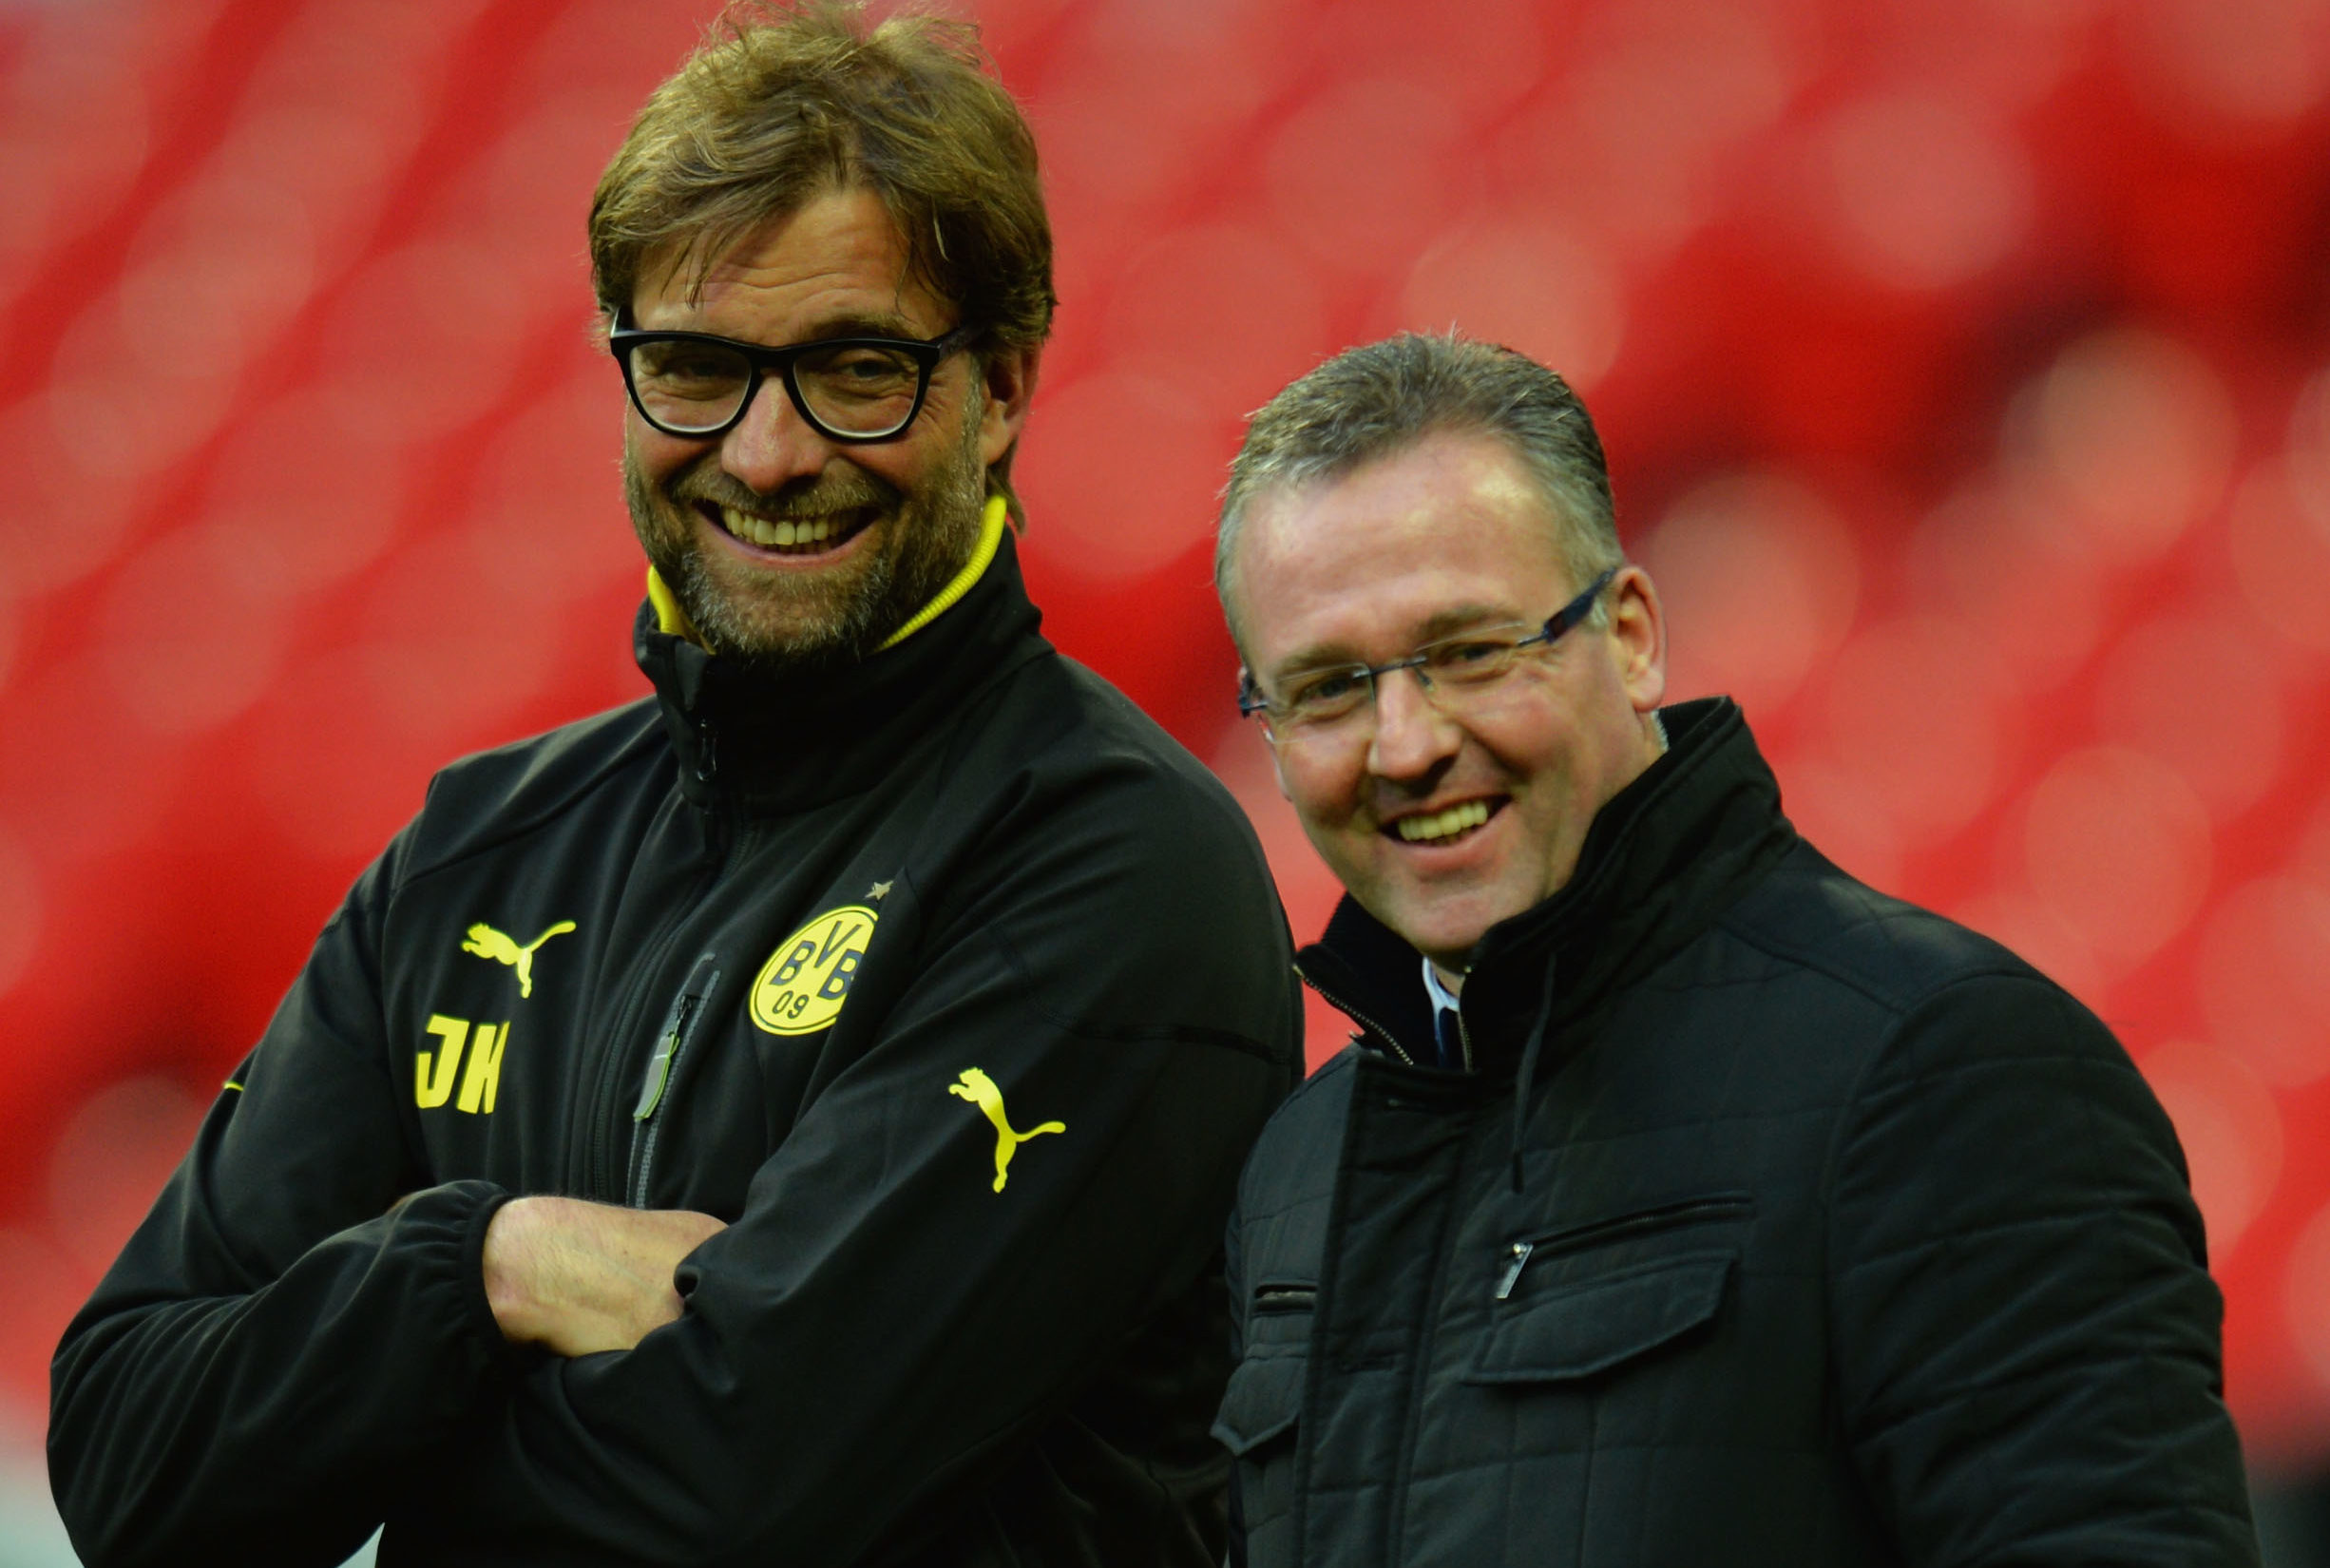 Paul Lambert with Jurgen Klopp as the German prepared for the Champions League Final at Wembley in 2013 (Shaun Botterill/Getty Images)